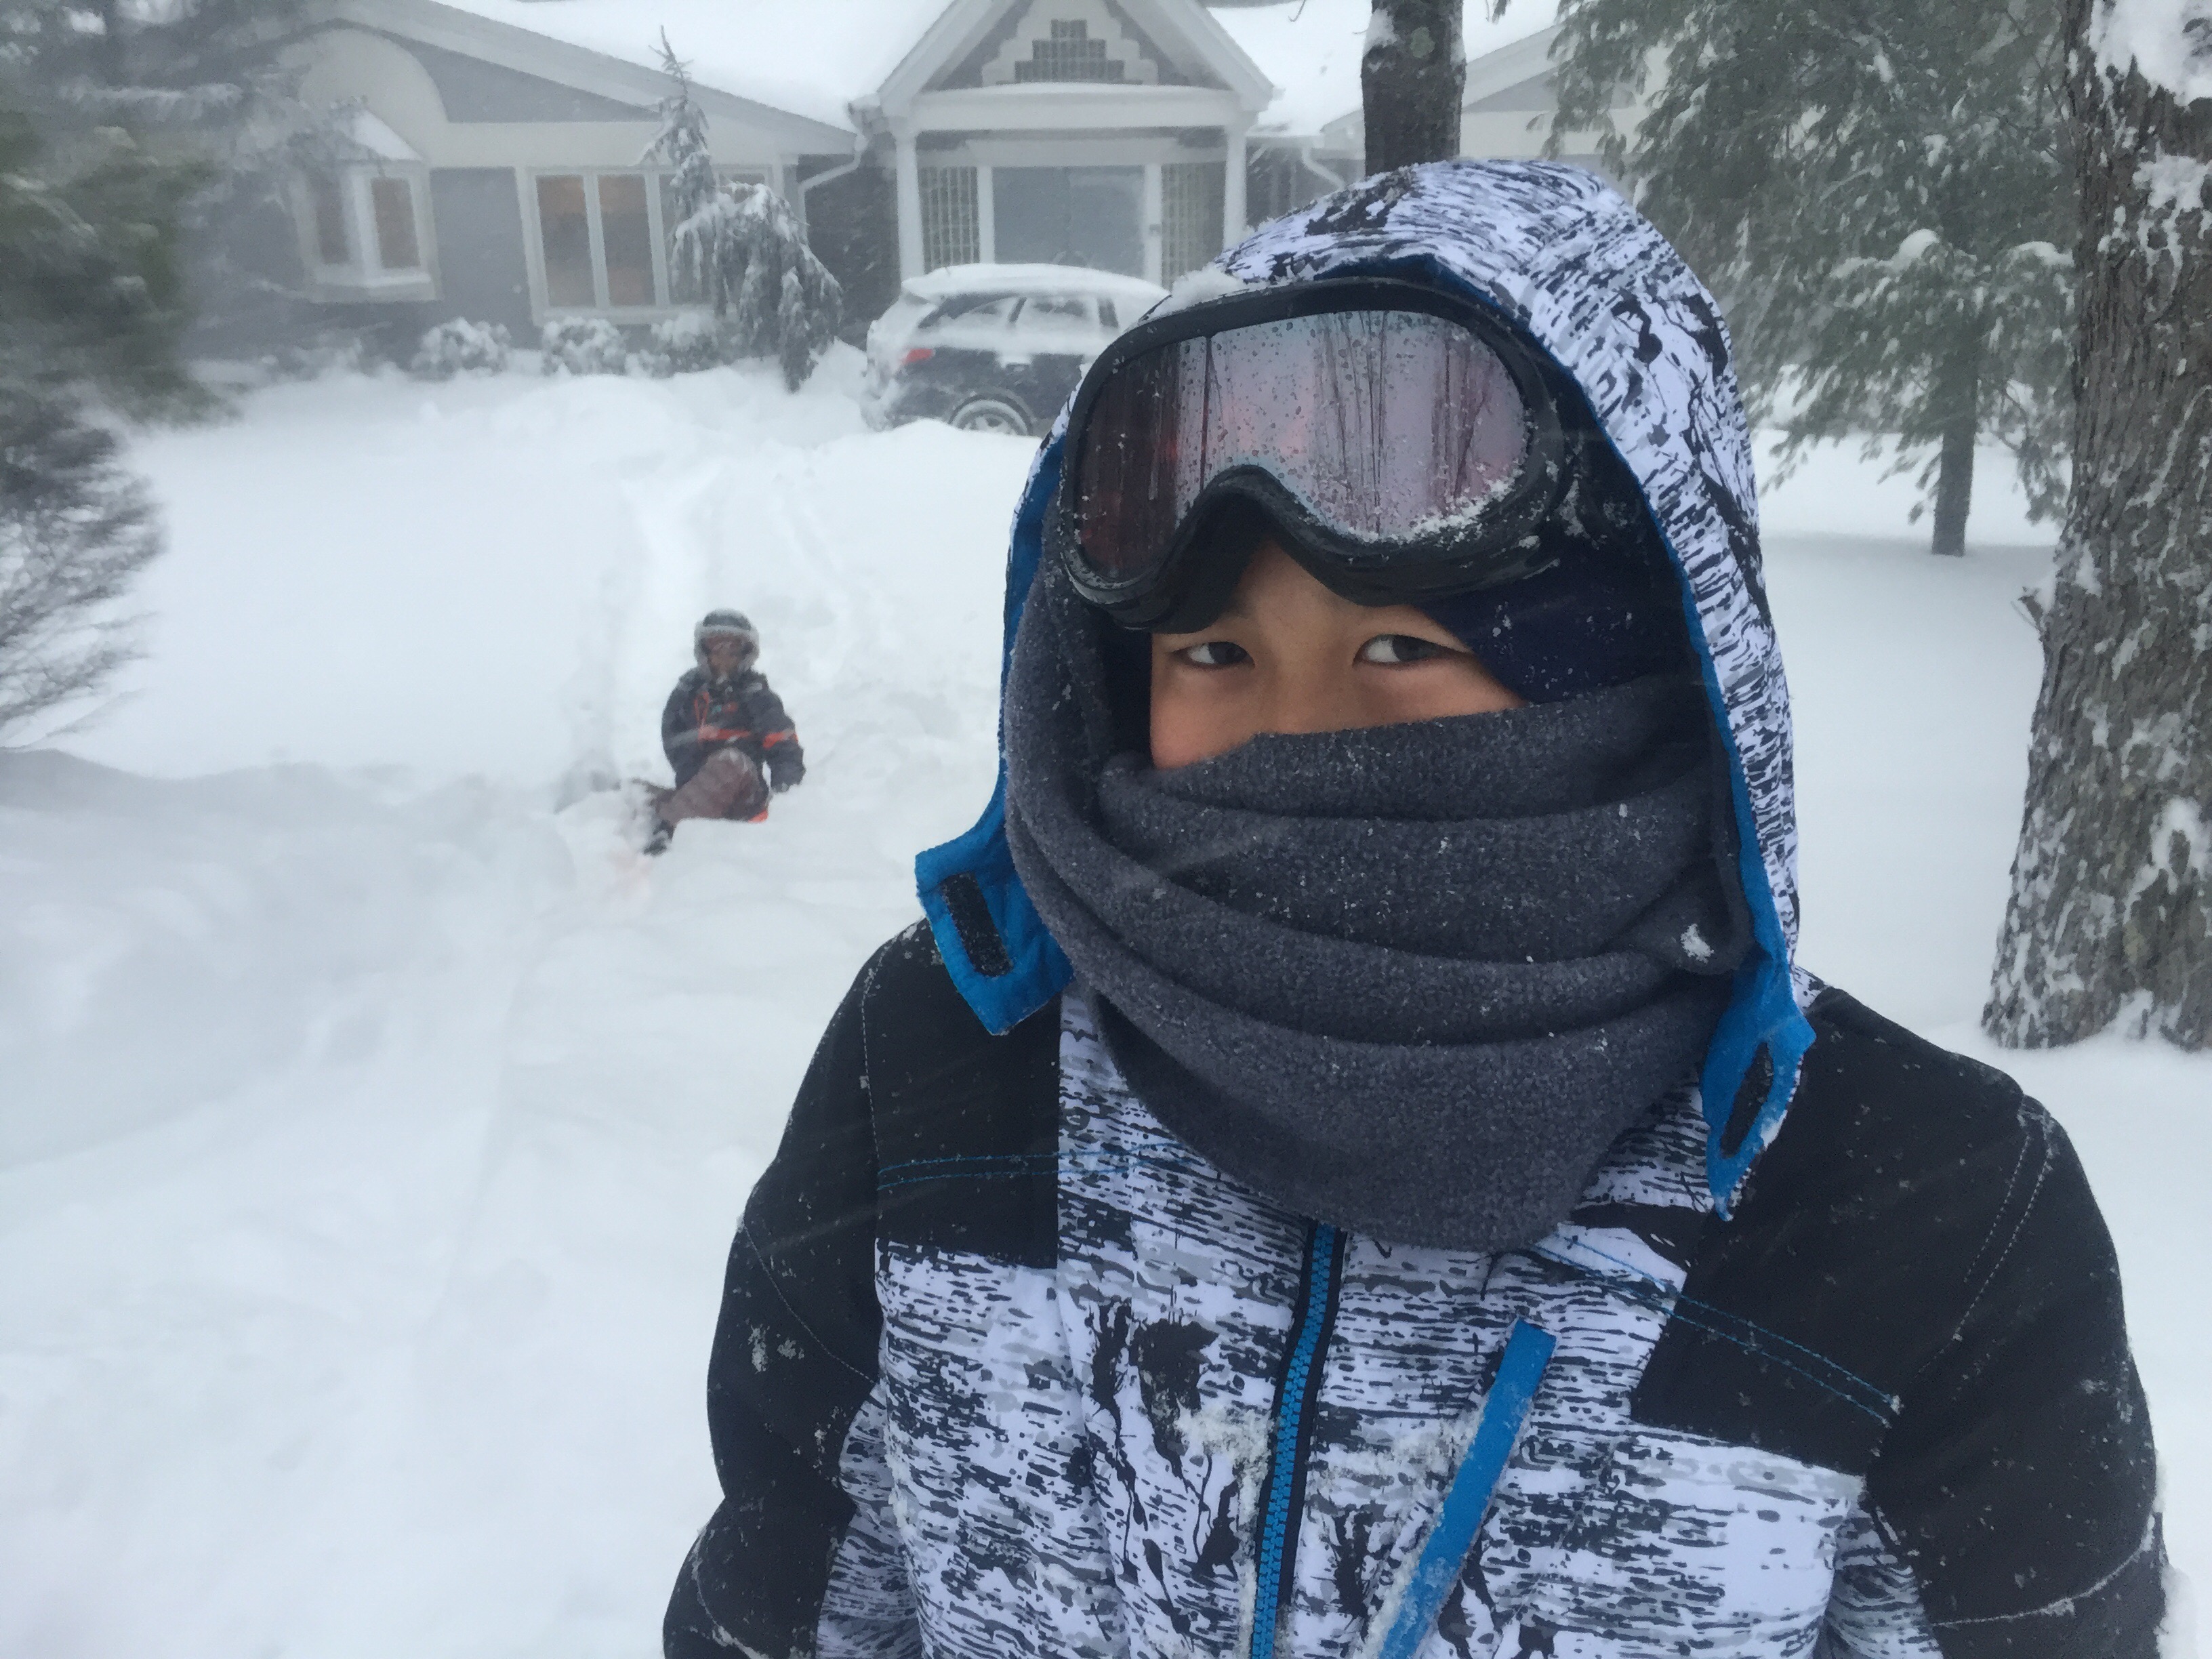 10 Things That Happened Around Here Because of #Blizzard2016